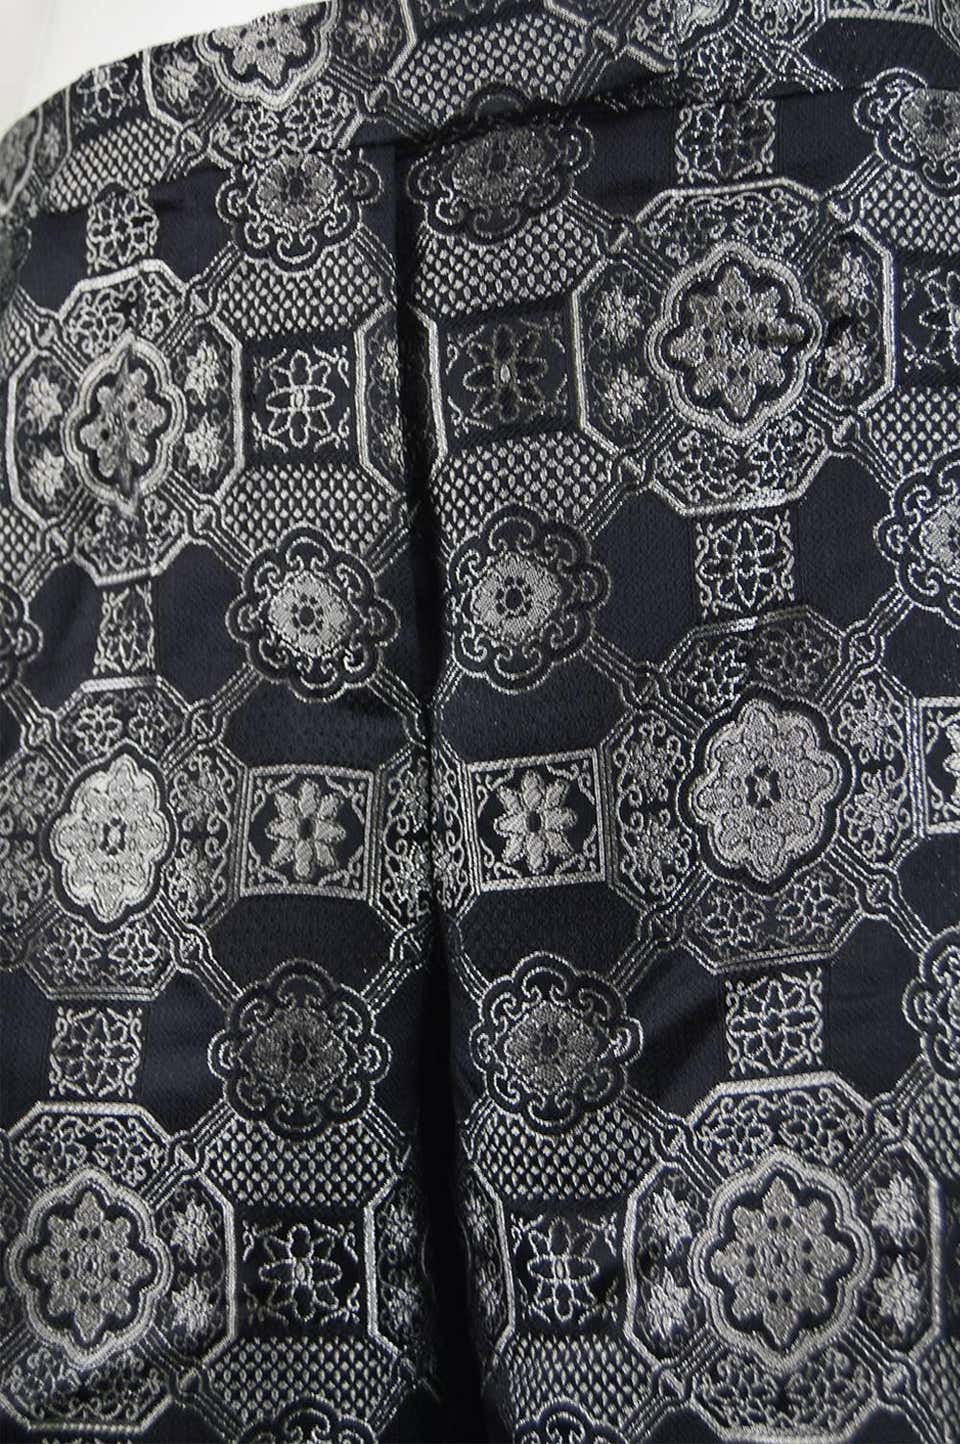 Vintage Womens Black & Silver Brocade Trousers, A/W 2003